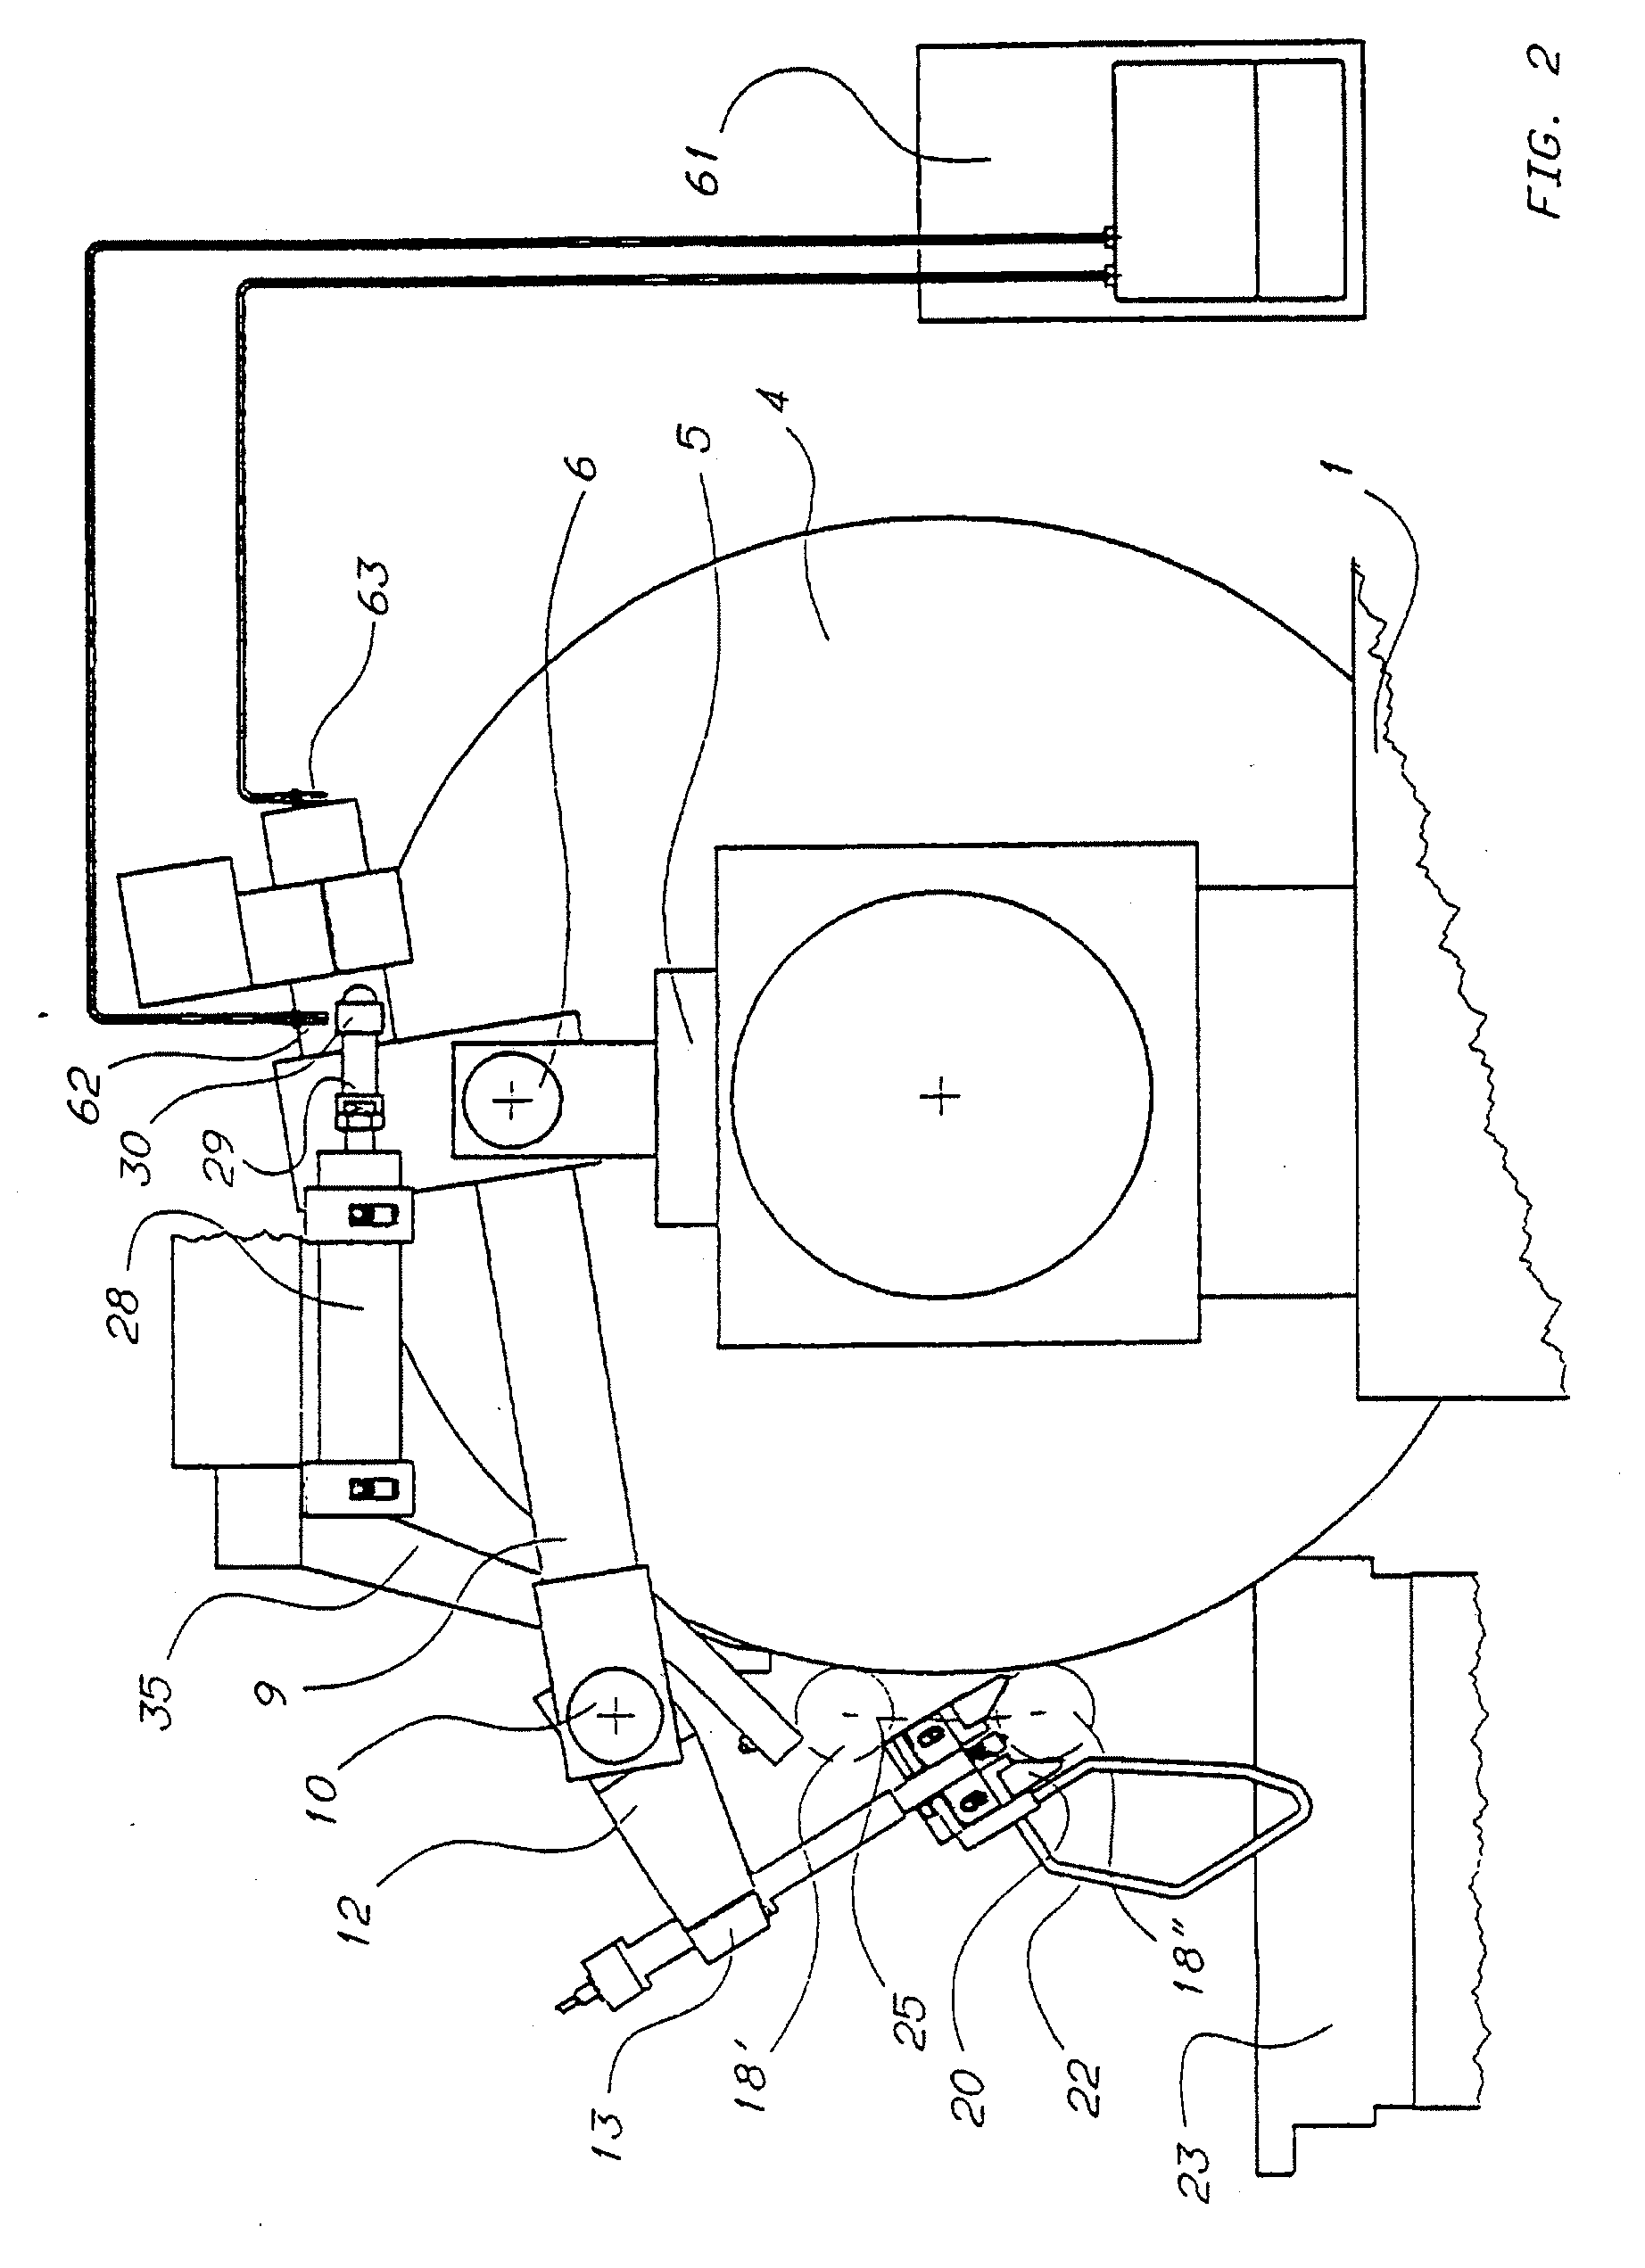 Apparatus for checking diametral dimensions of a rotating cylindrical part during a grinding thereof